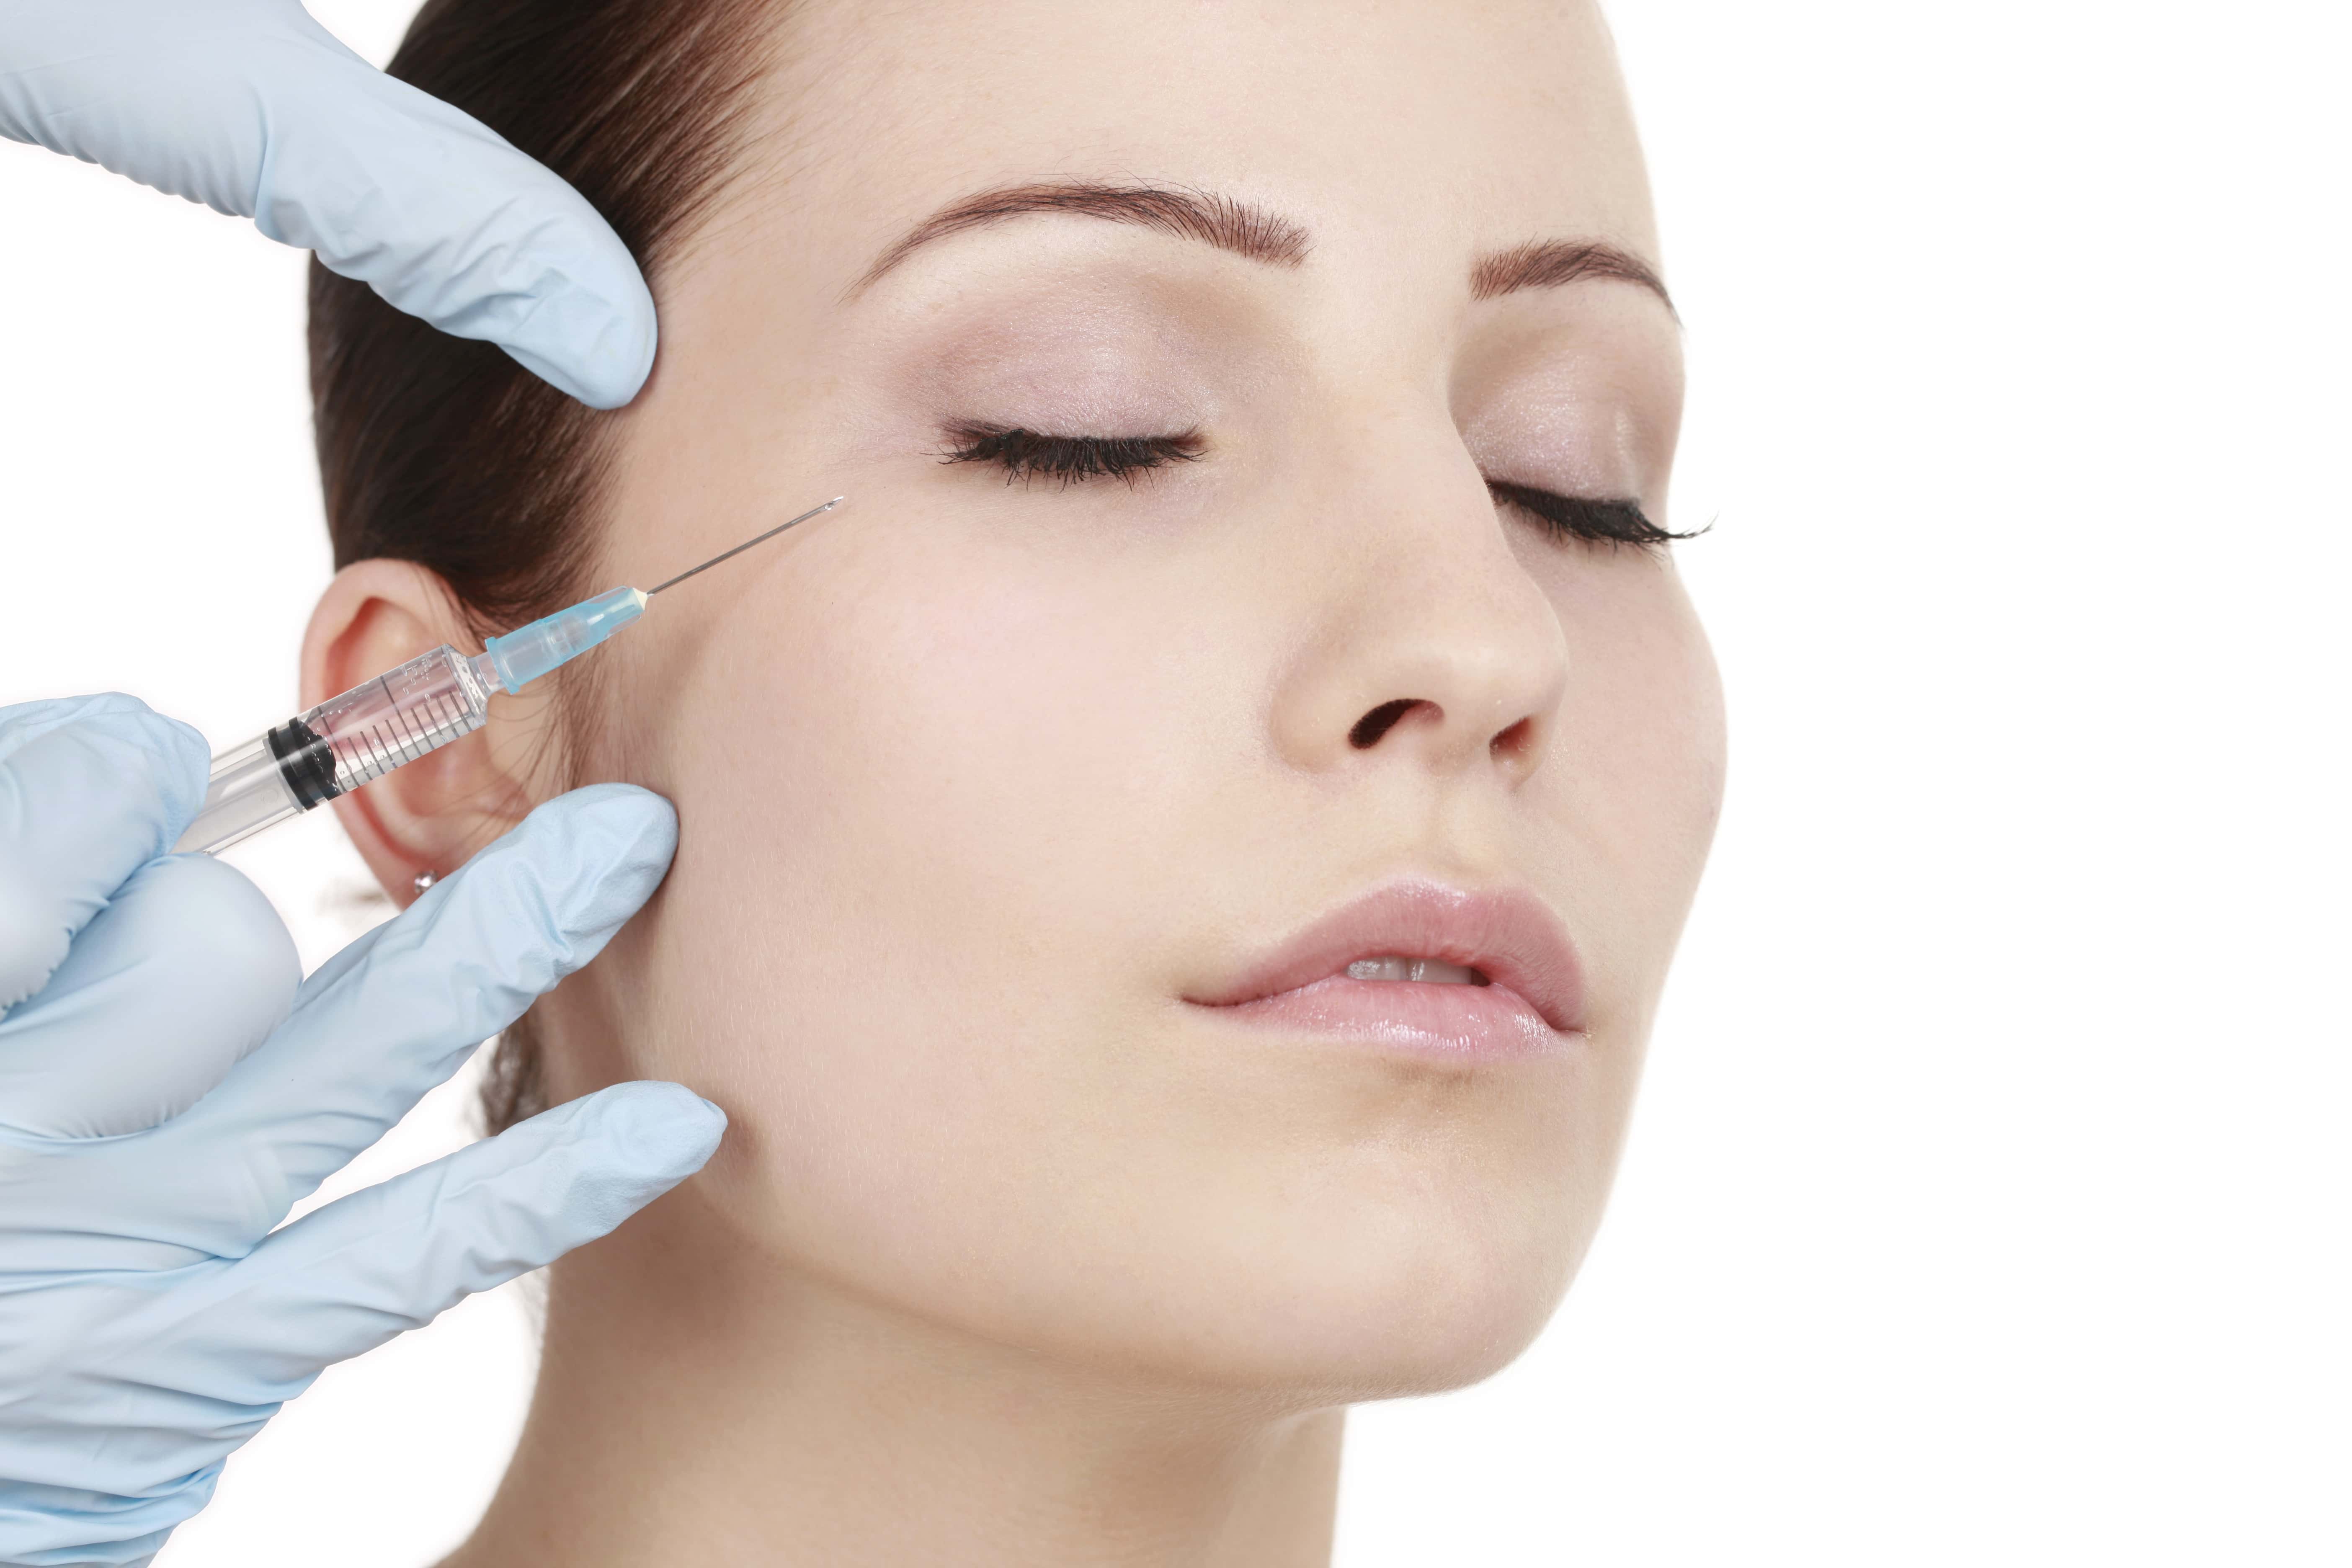 Botox and Filler: 5 Things to Know Before Having Treatment